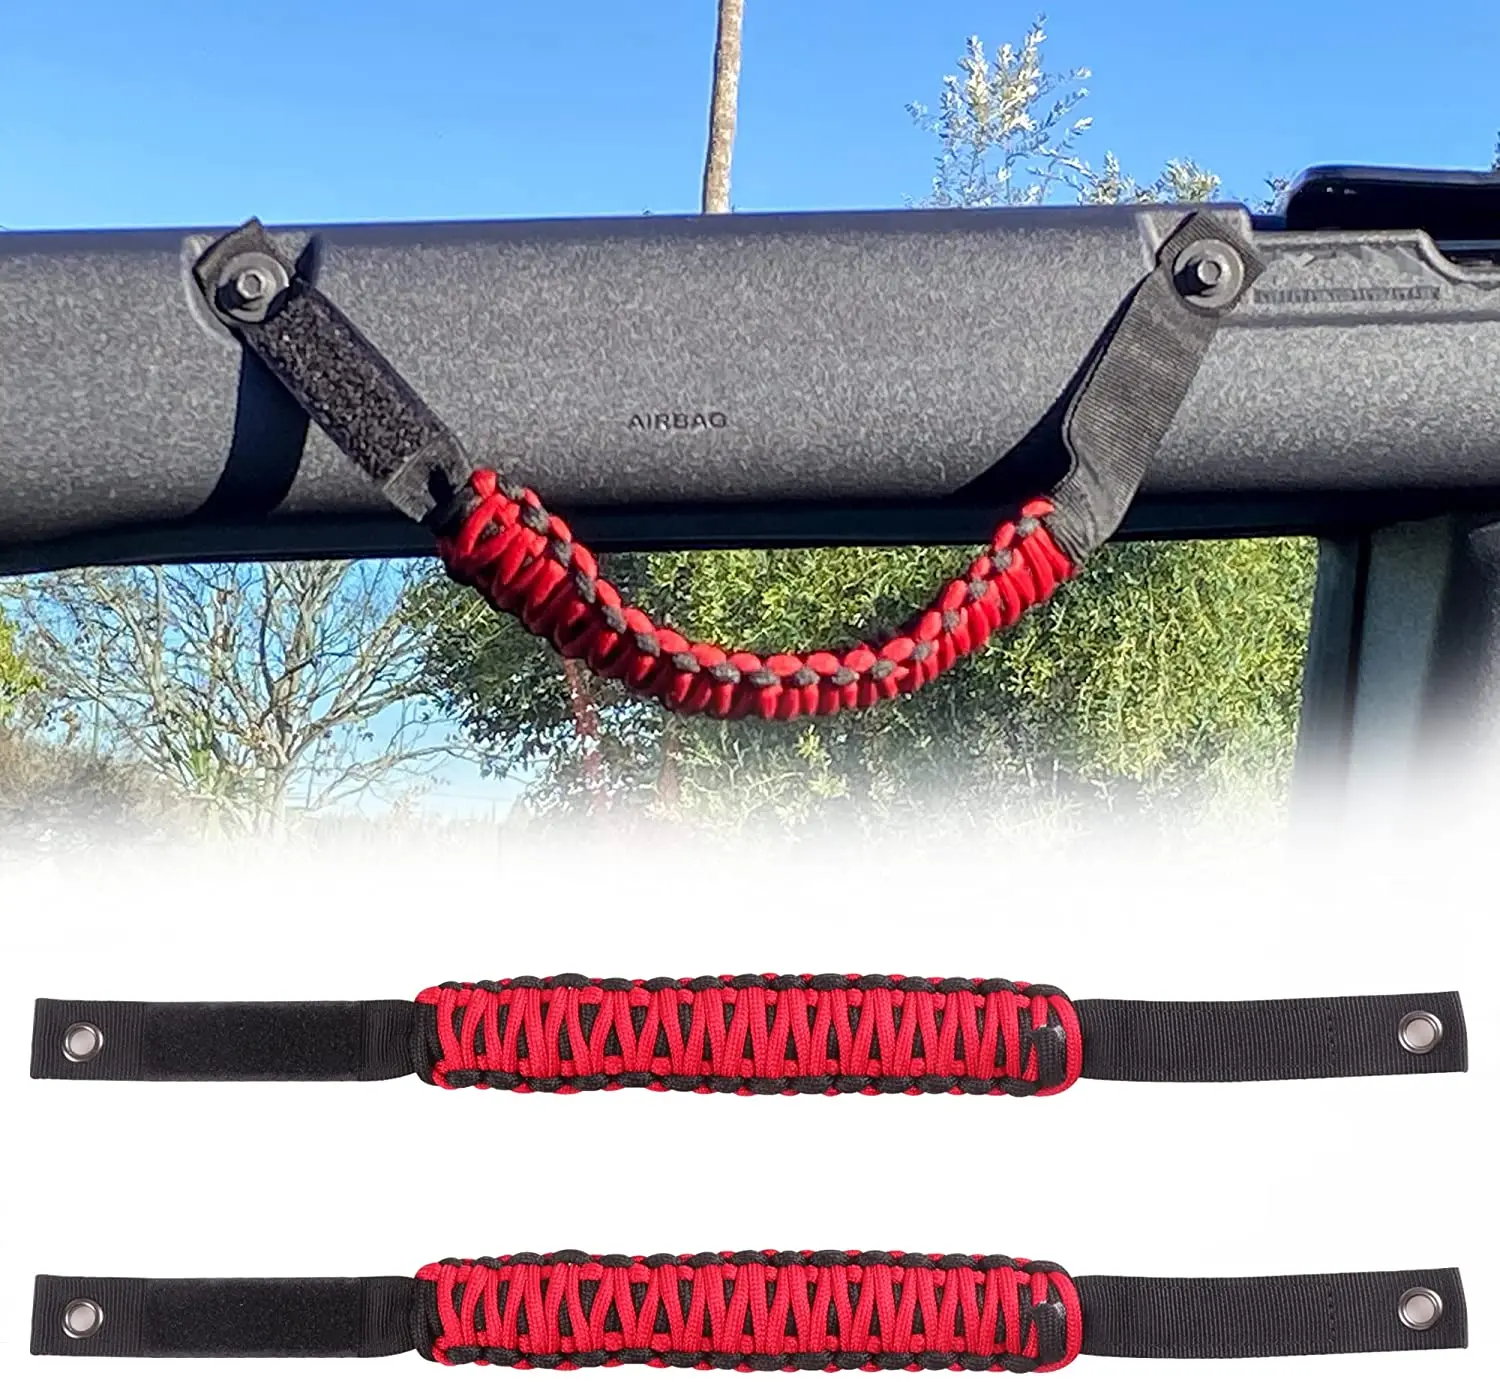 Black 2Pcs Interior Accessories Ford Bronco Roll Bar Grab Handles Cartaoo Premium Paracord Grips Fit 2021 2022 Ford Bronco Accessories 